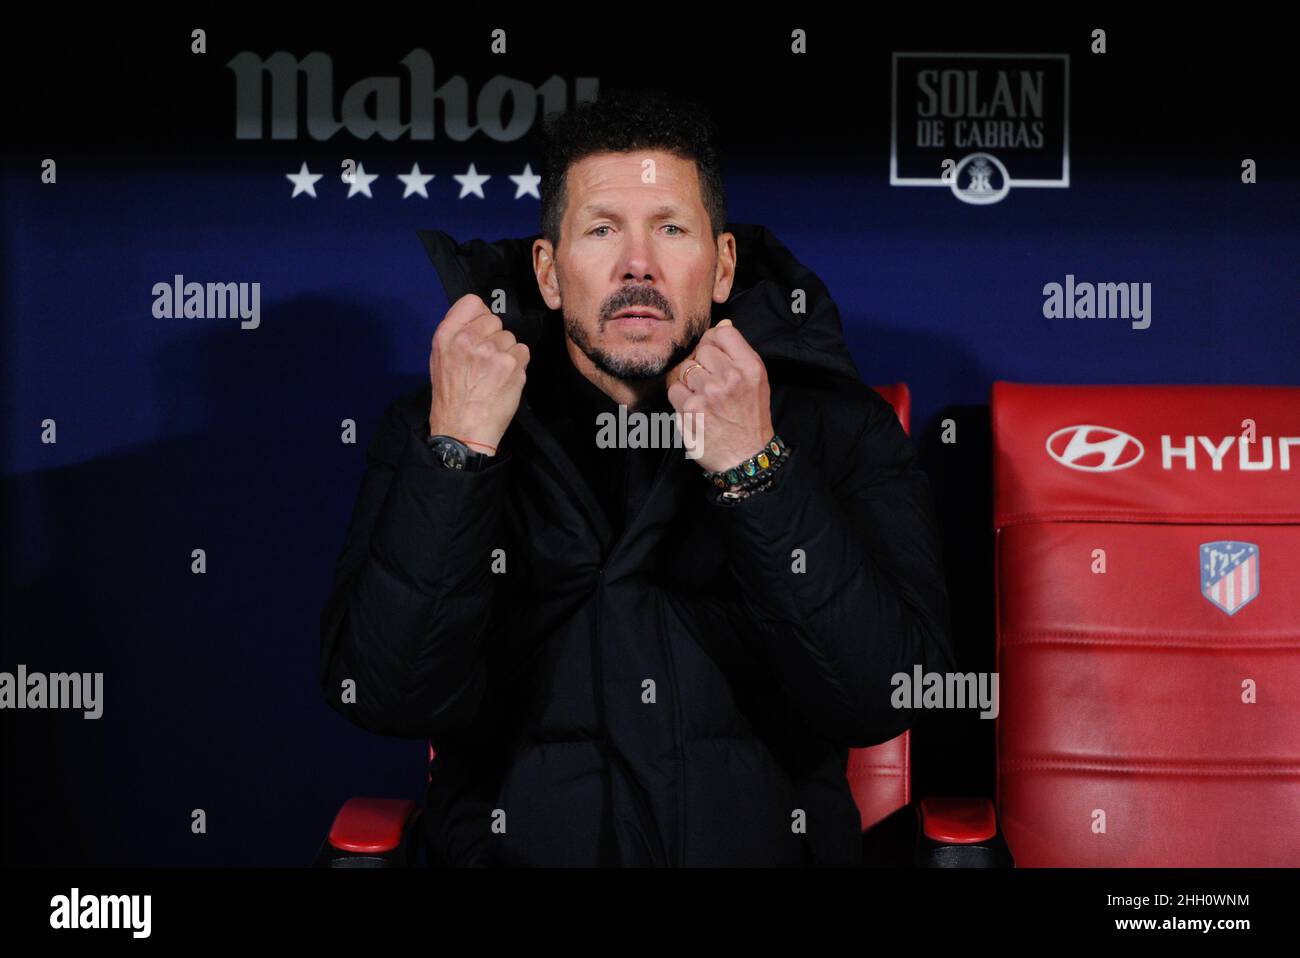 Madrid, Spain. 22nd Jan, 2021. Atletico de Madrid's coach Diego Simeone reacts during a Spanish first division league football match between Atletico de Madrid and Valencia CF in Madrid, Spain, Jan. 22, 2021. Credit: Gustavo Valiente/Xinhua/Alamy Live News Stock Photo